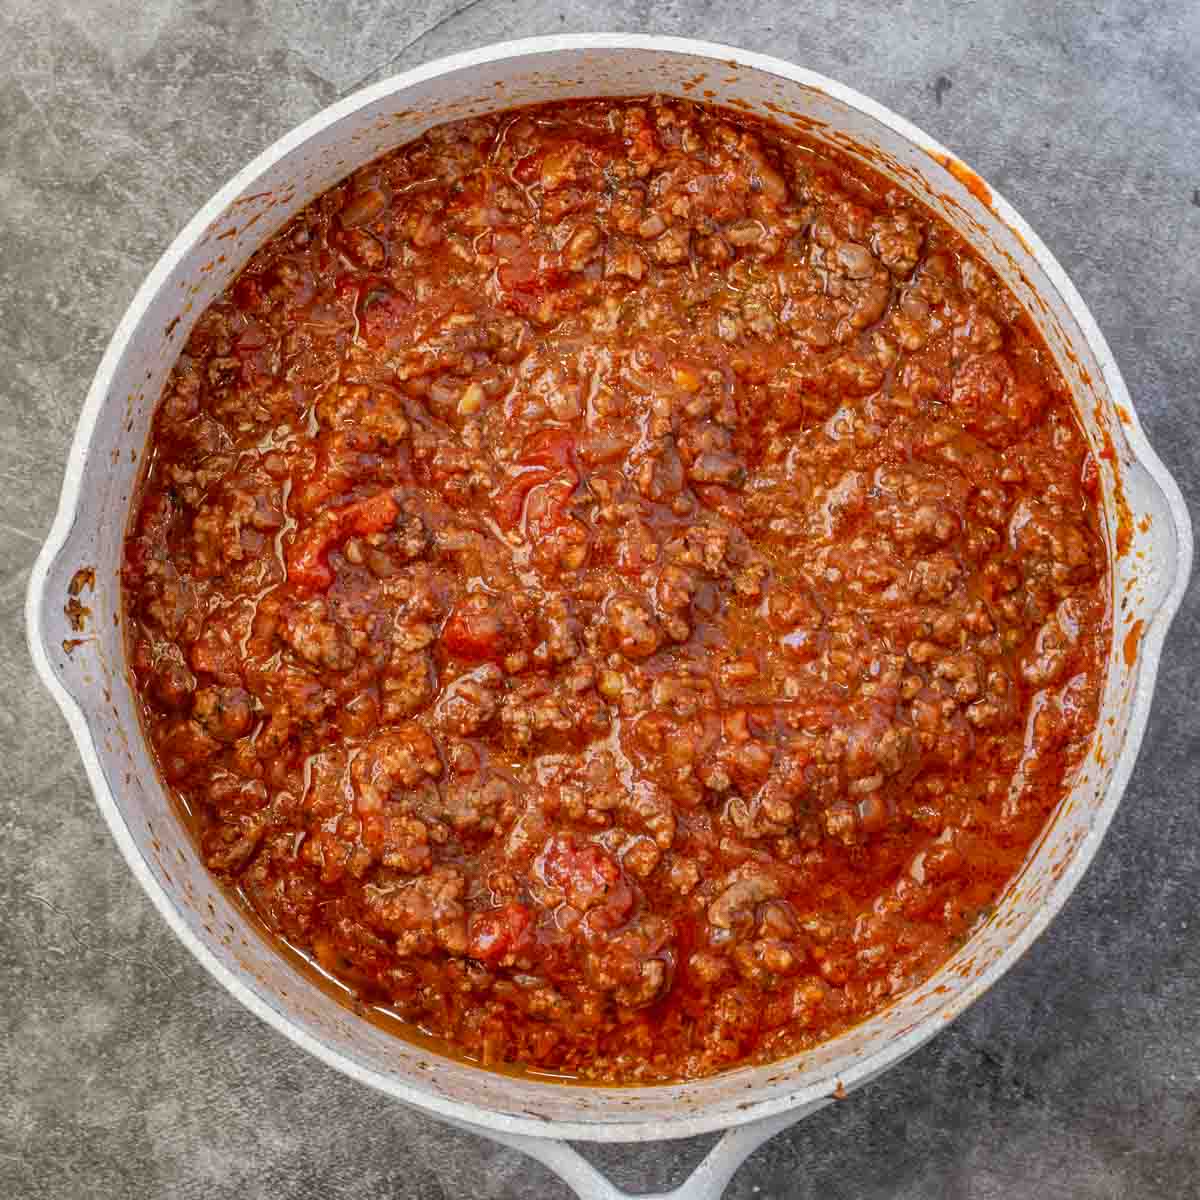 A skillet containing cooked ground beef with marinara sauce.